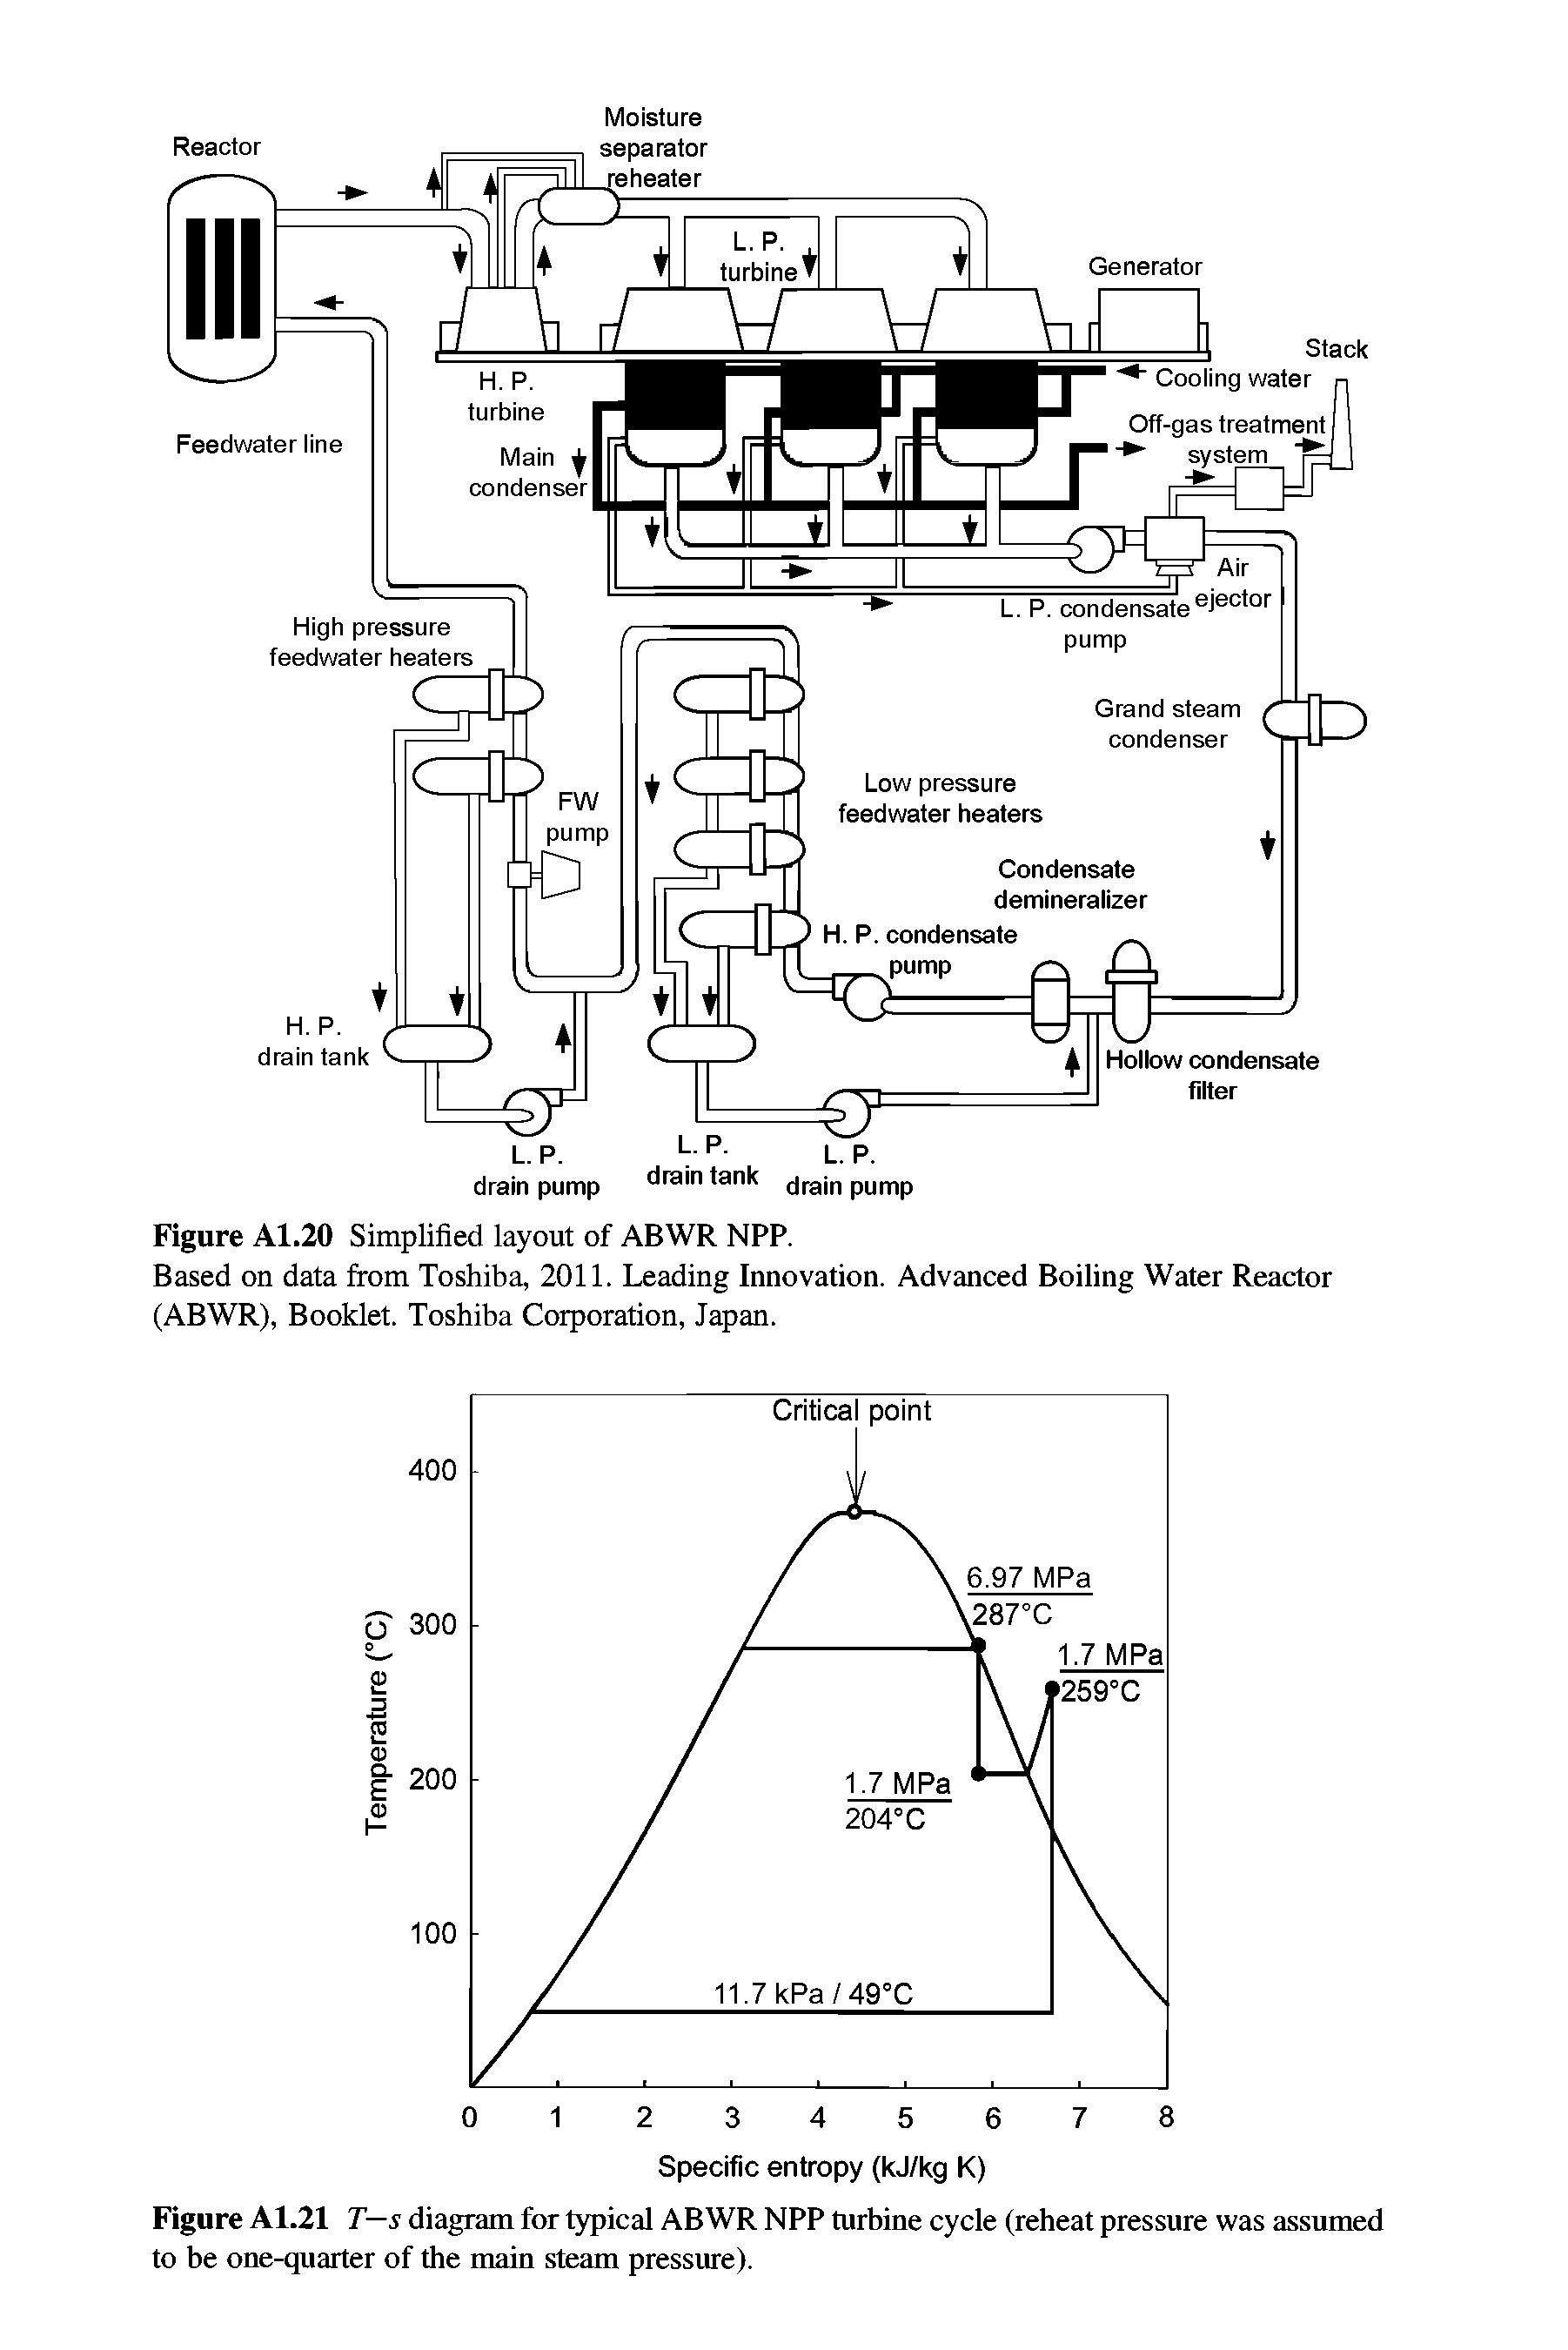 Figure A1.21 T—s diagram for typical ABWR NPP turbine cycle (reheat pressure was assumed to be one-quarter of the main steam pressure).